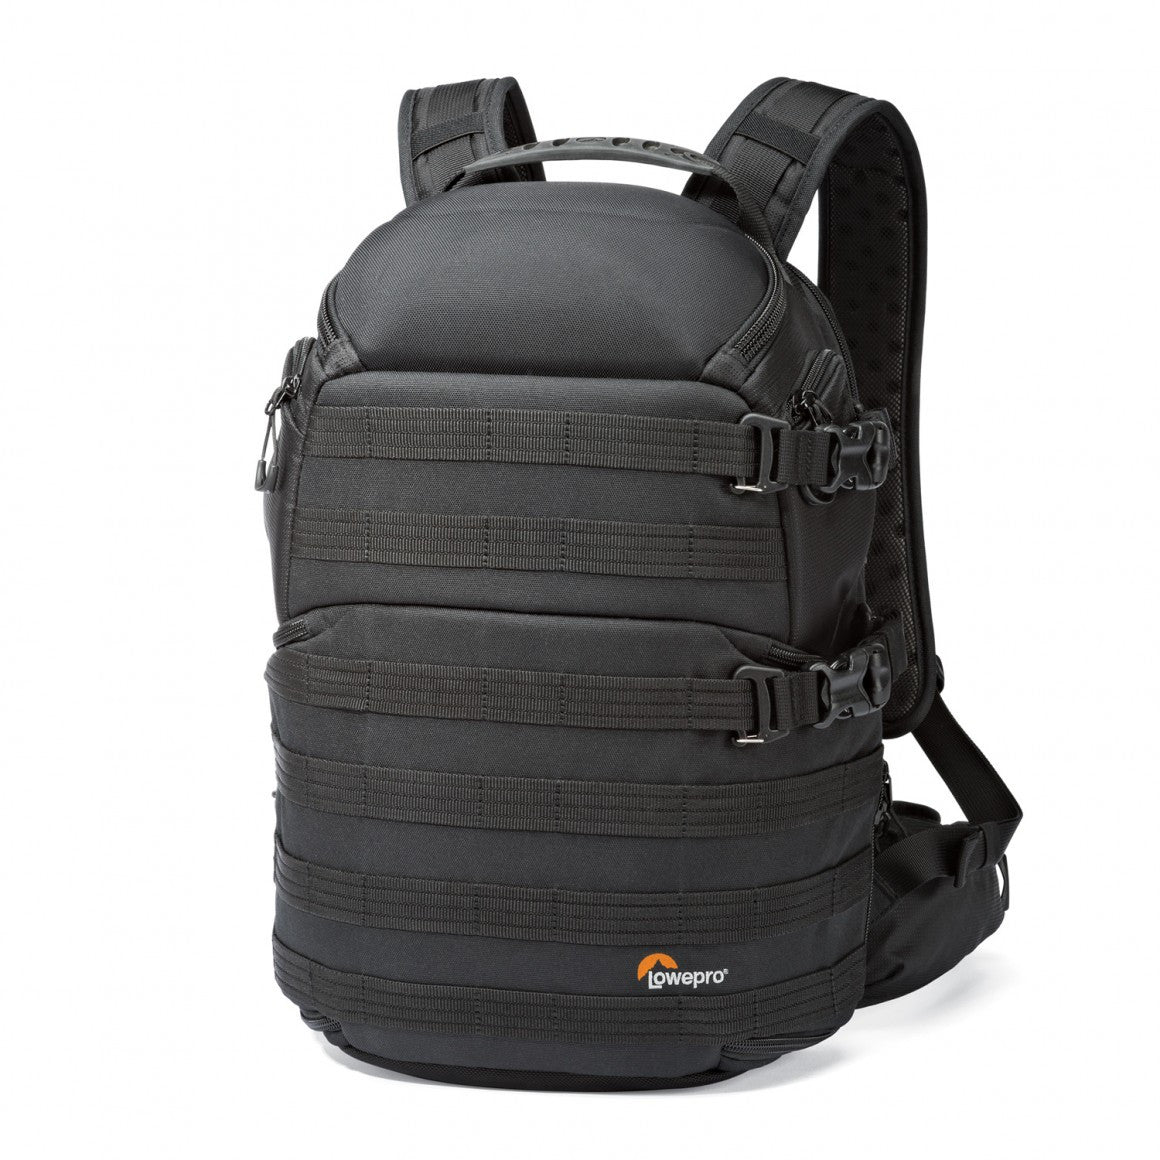 Lowepro Pro Tactic 350 AW Camera Bag, bags backpacks, Lowepro - Pictureline  - 1